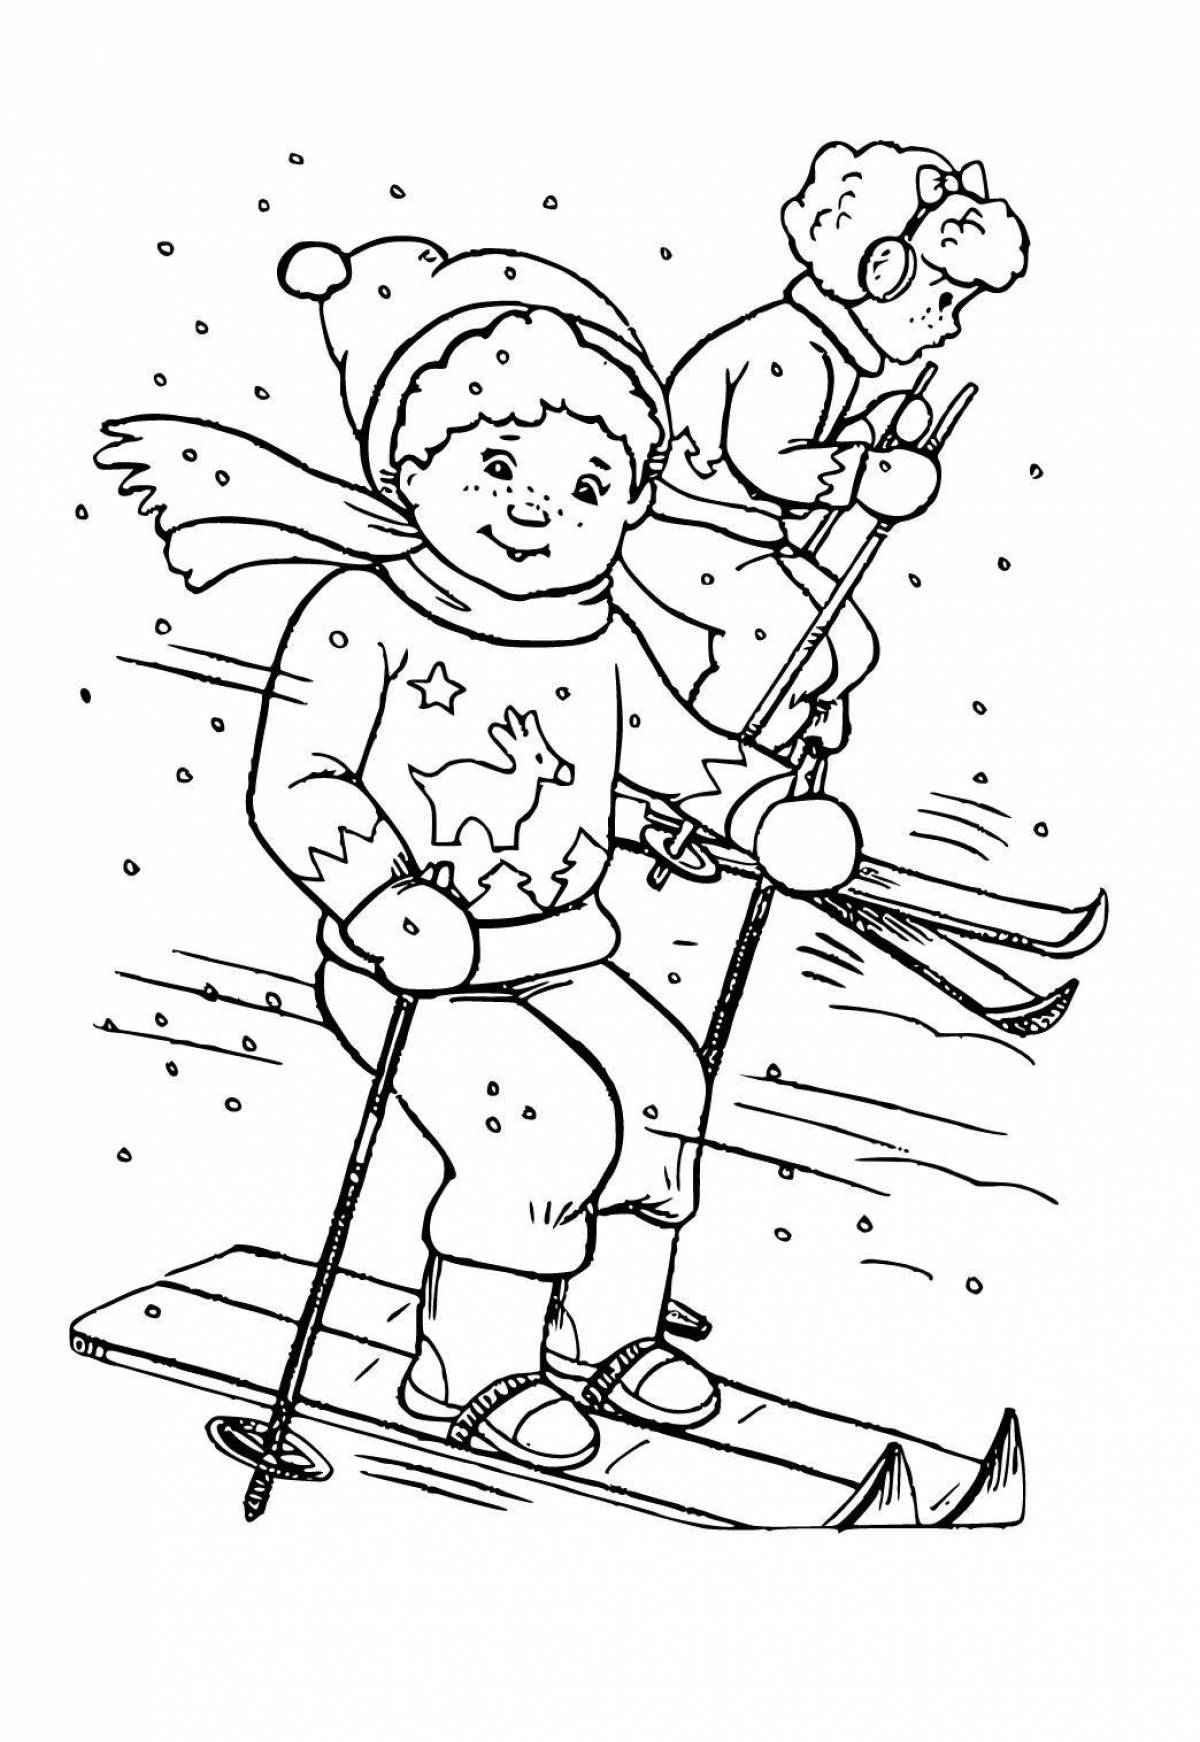 Coloring page of the outgoing baby skier